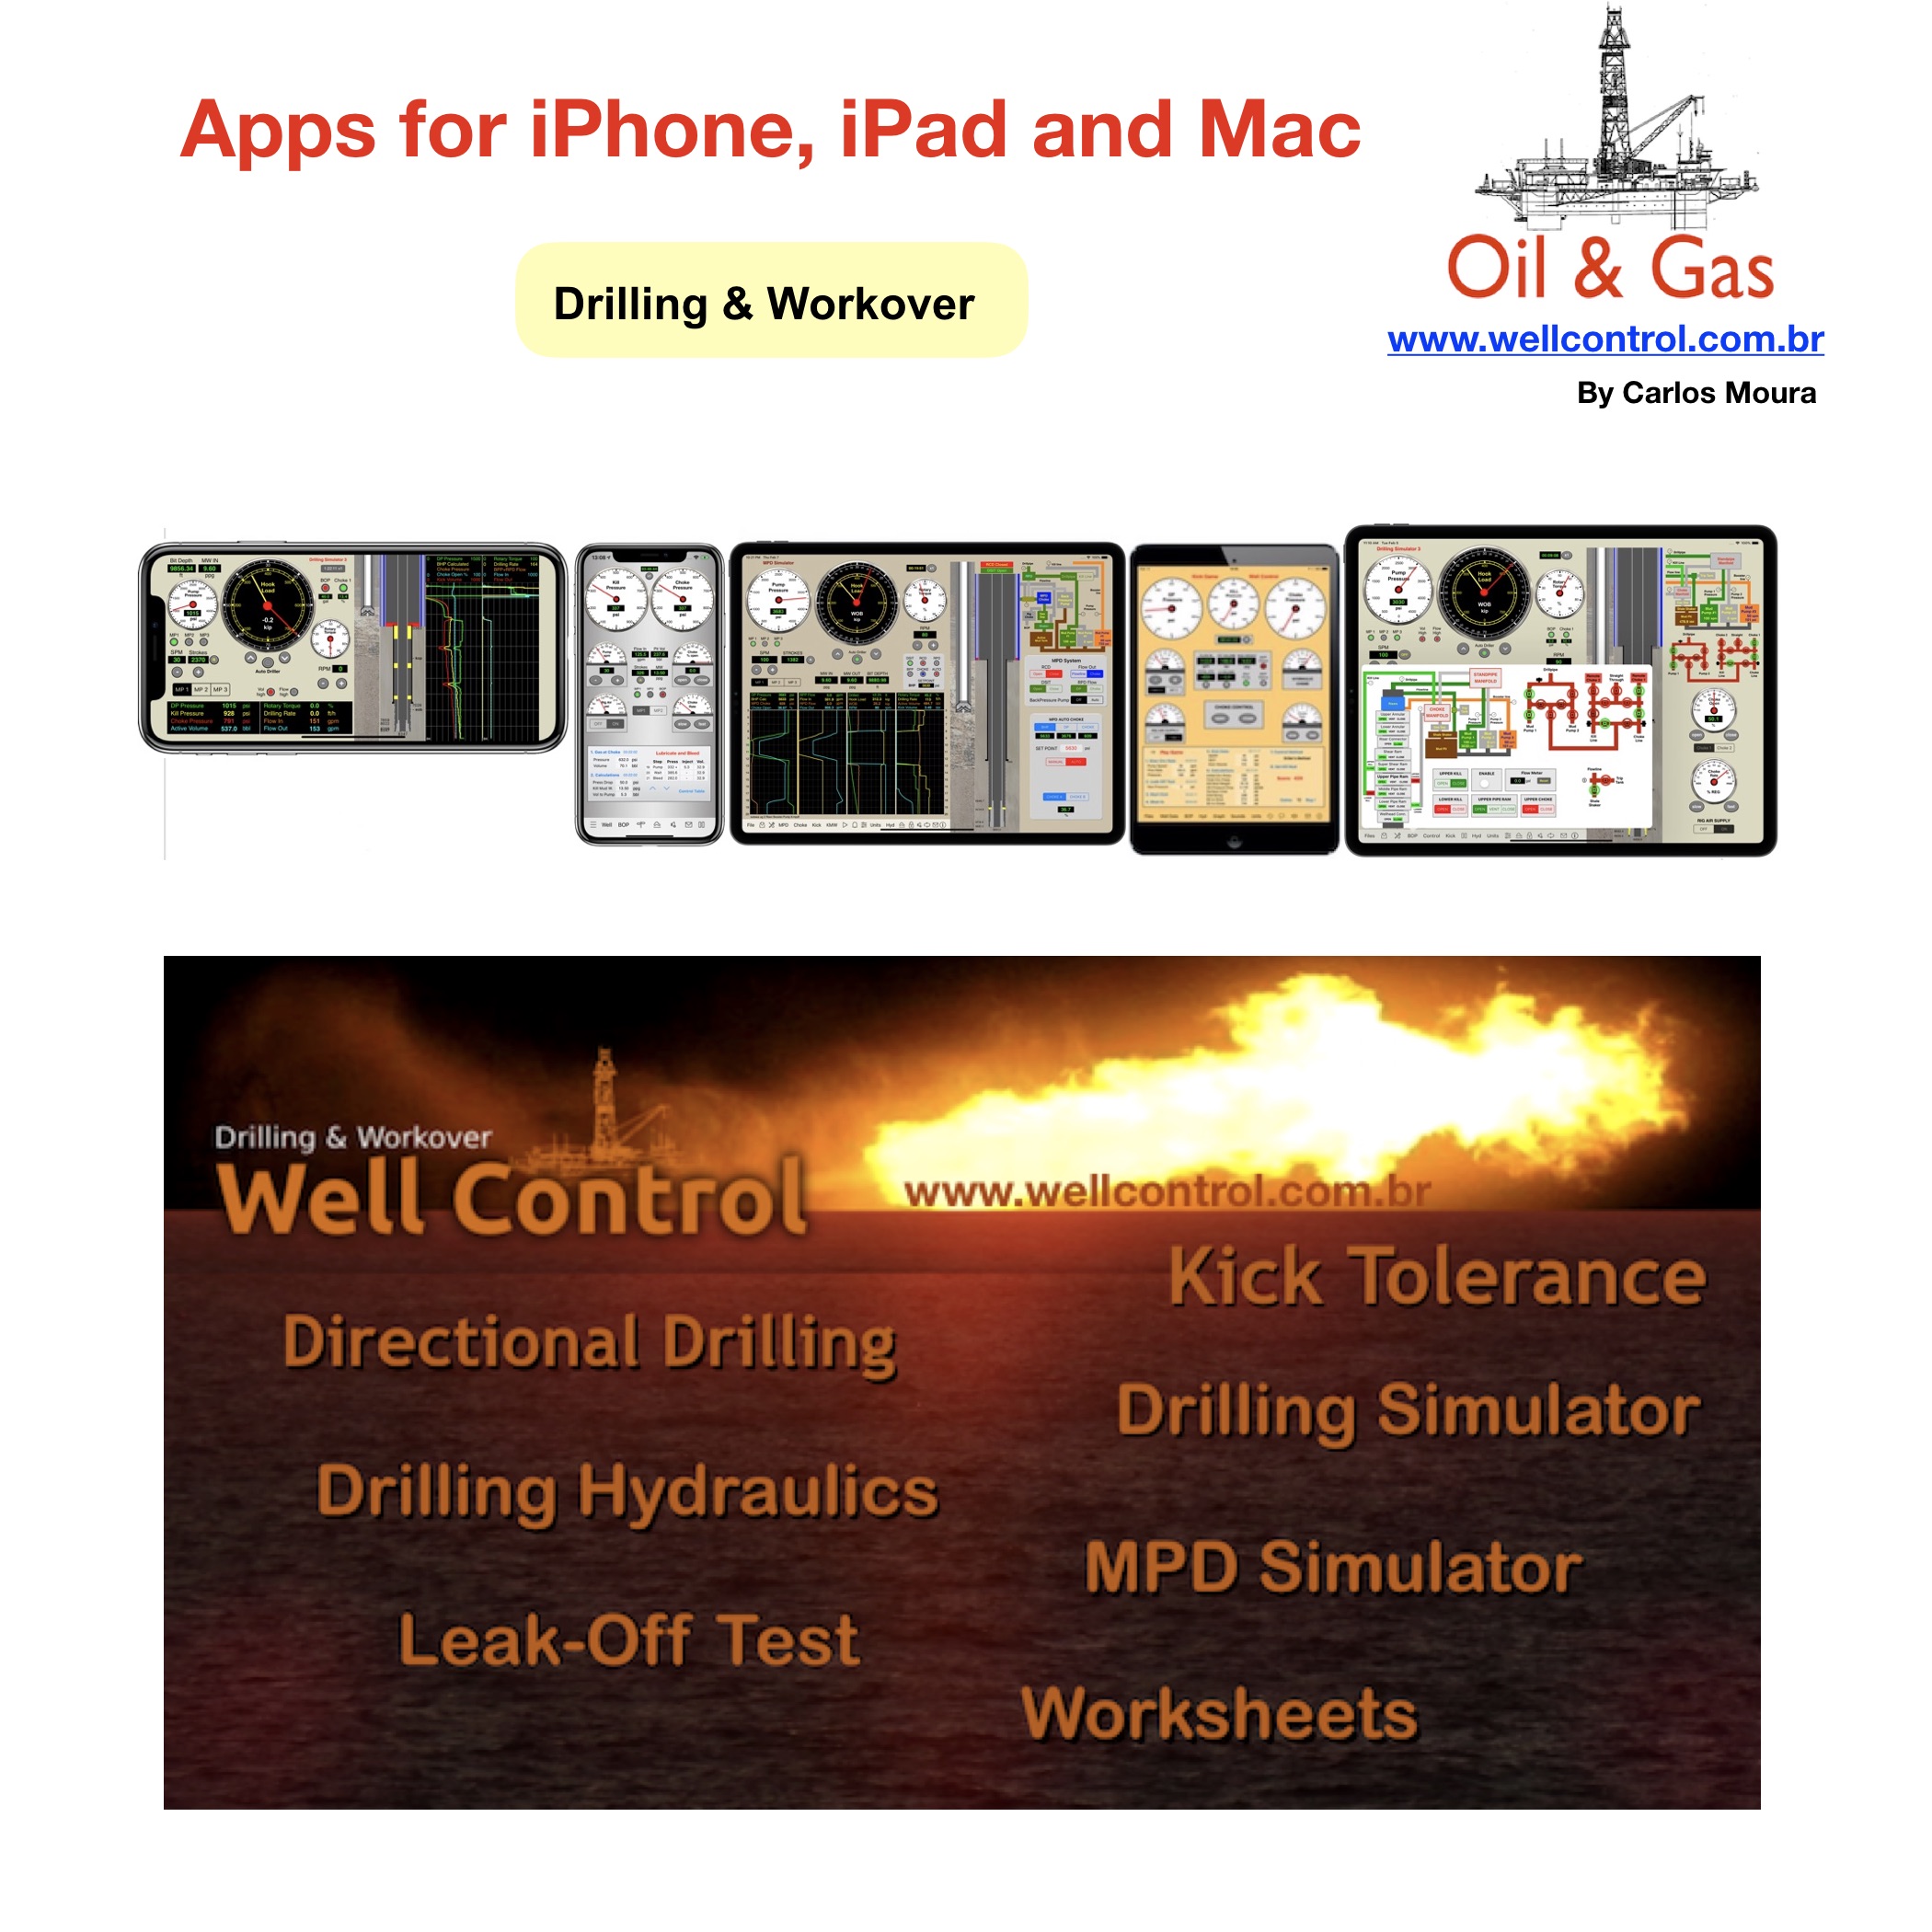 wellcontrol_apps_blogs_02